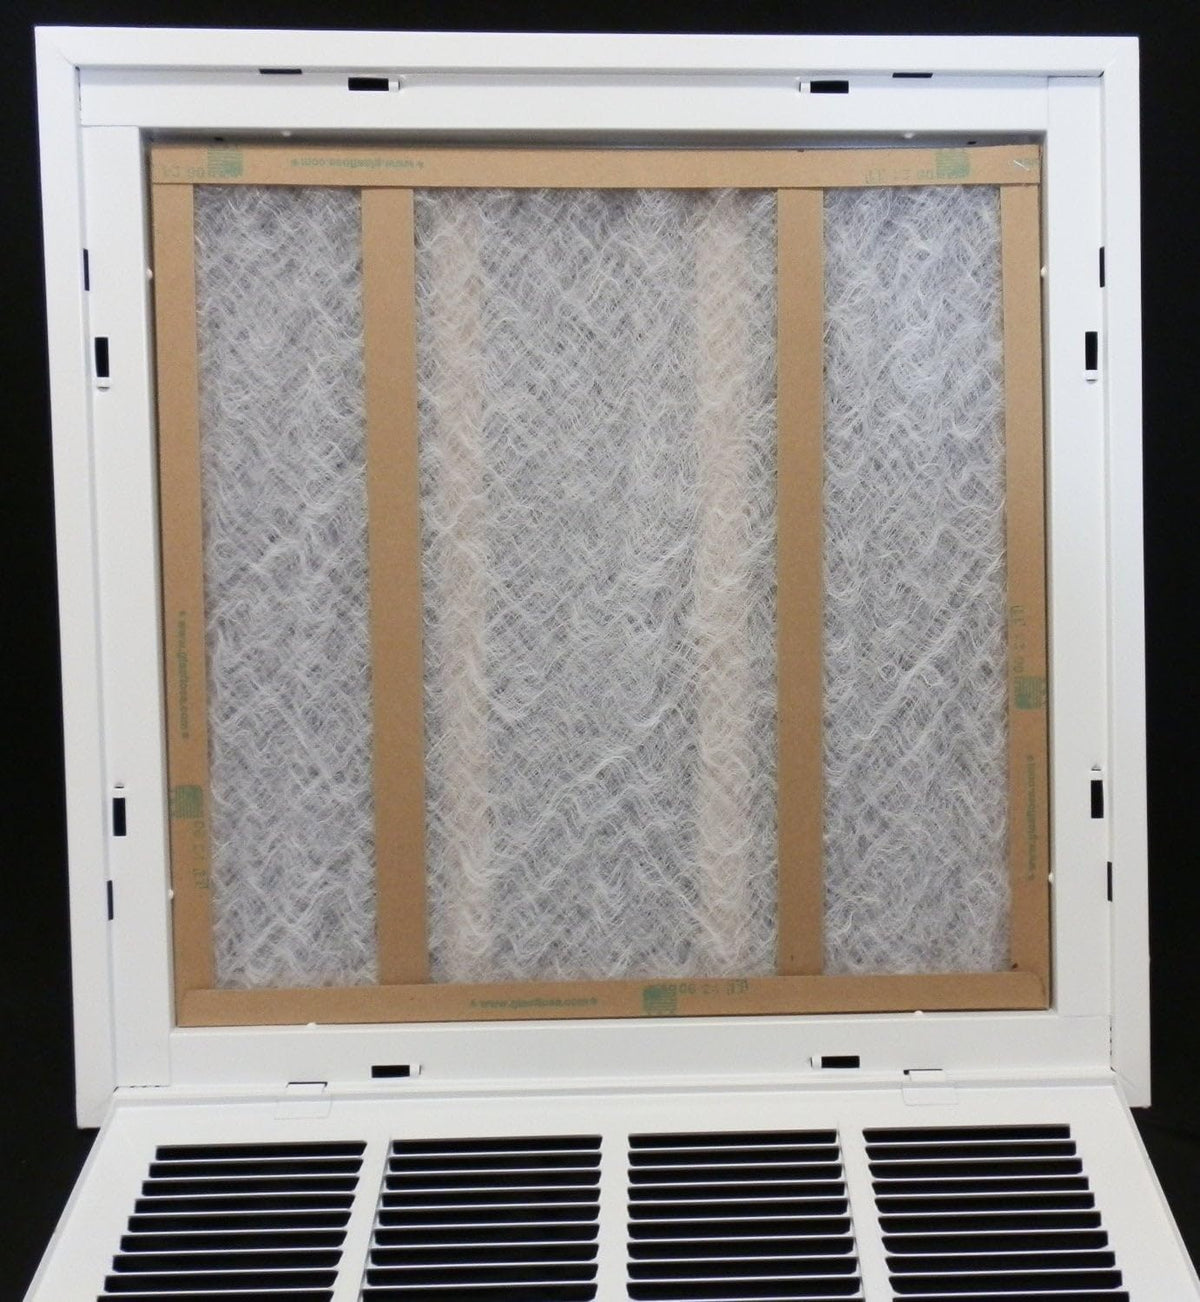 12&quot; X 32&quot; Steel Return Air Filter Grille for 1&quot; Filter - Removable Frame - [Outer Dimensions: 14 5/8&quot; X 34 5/8&quot;]